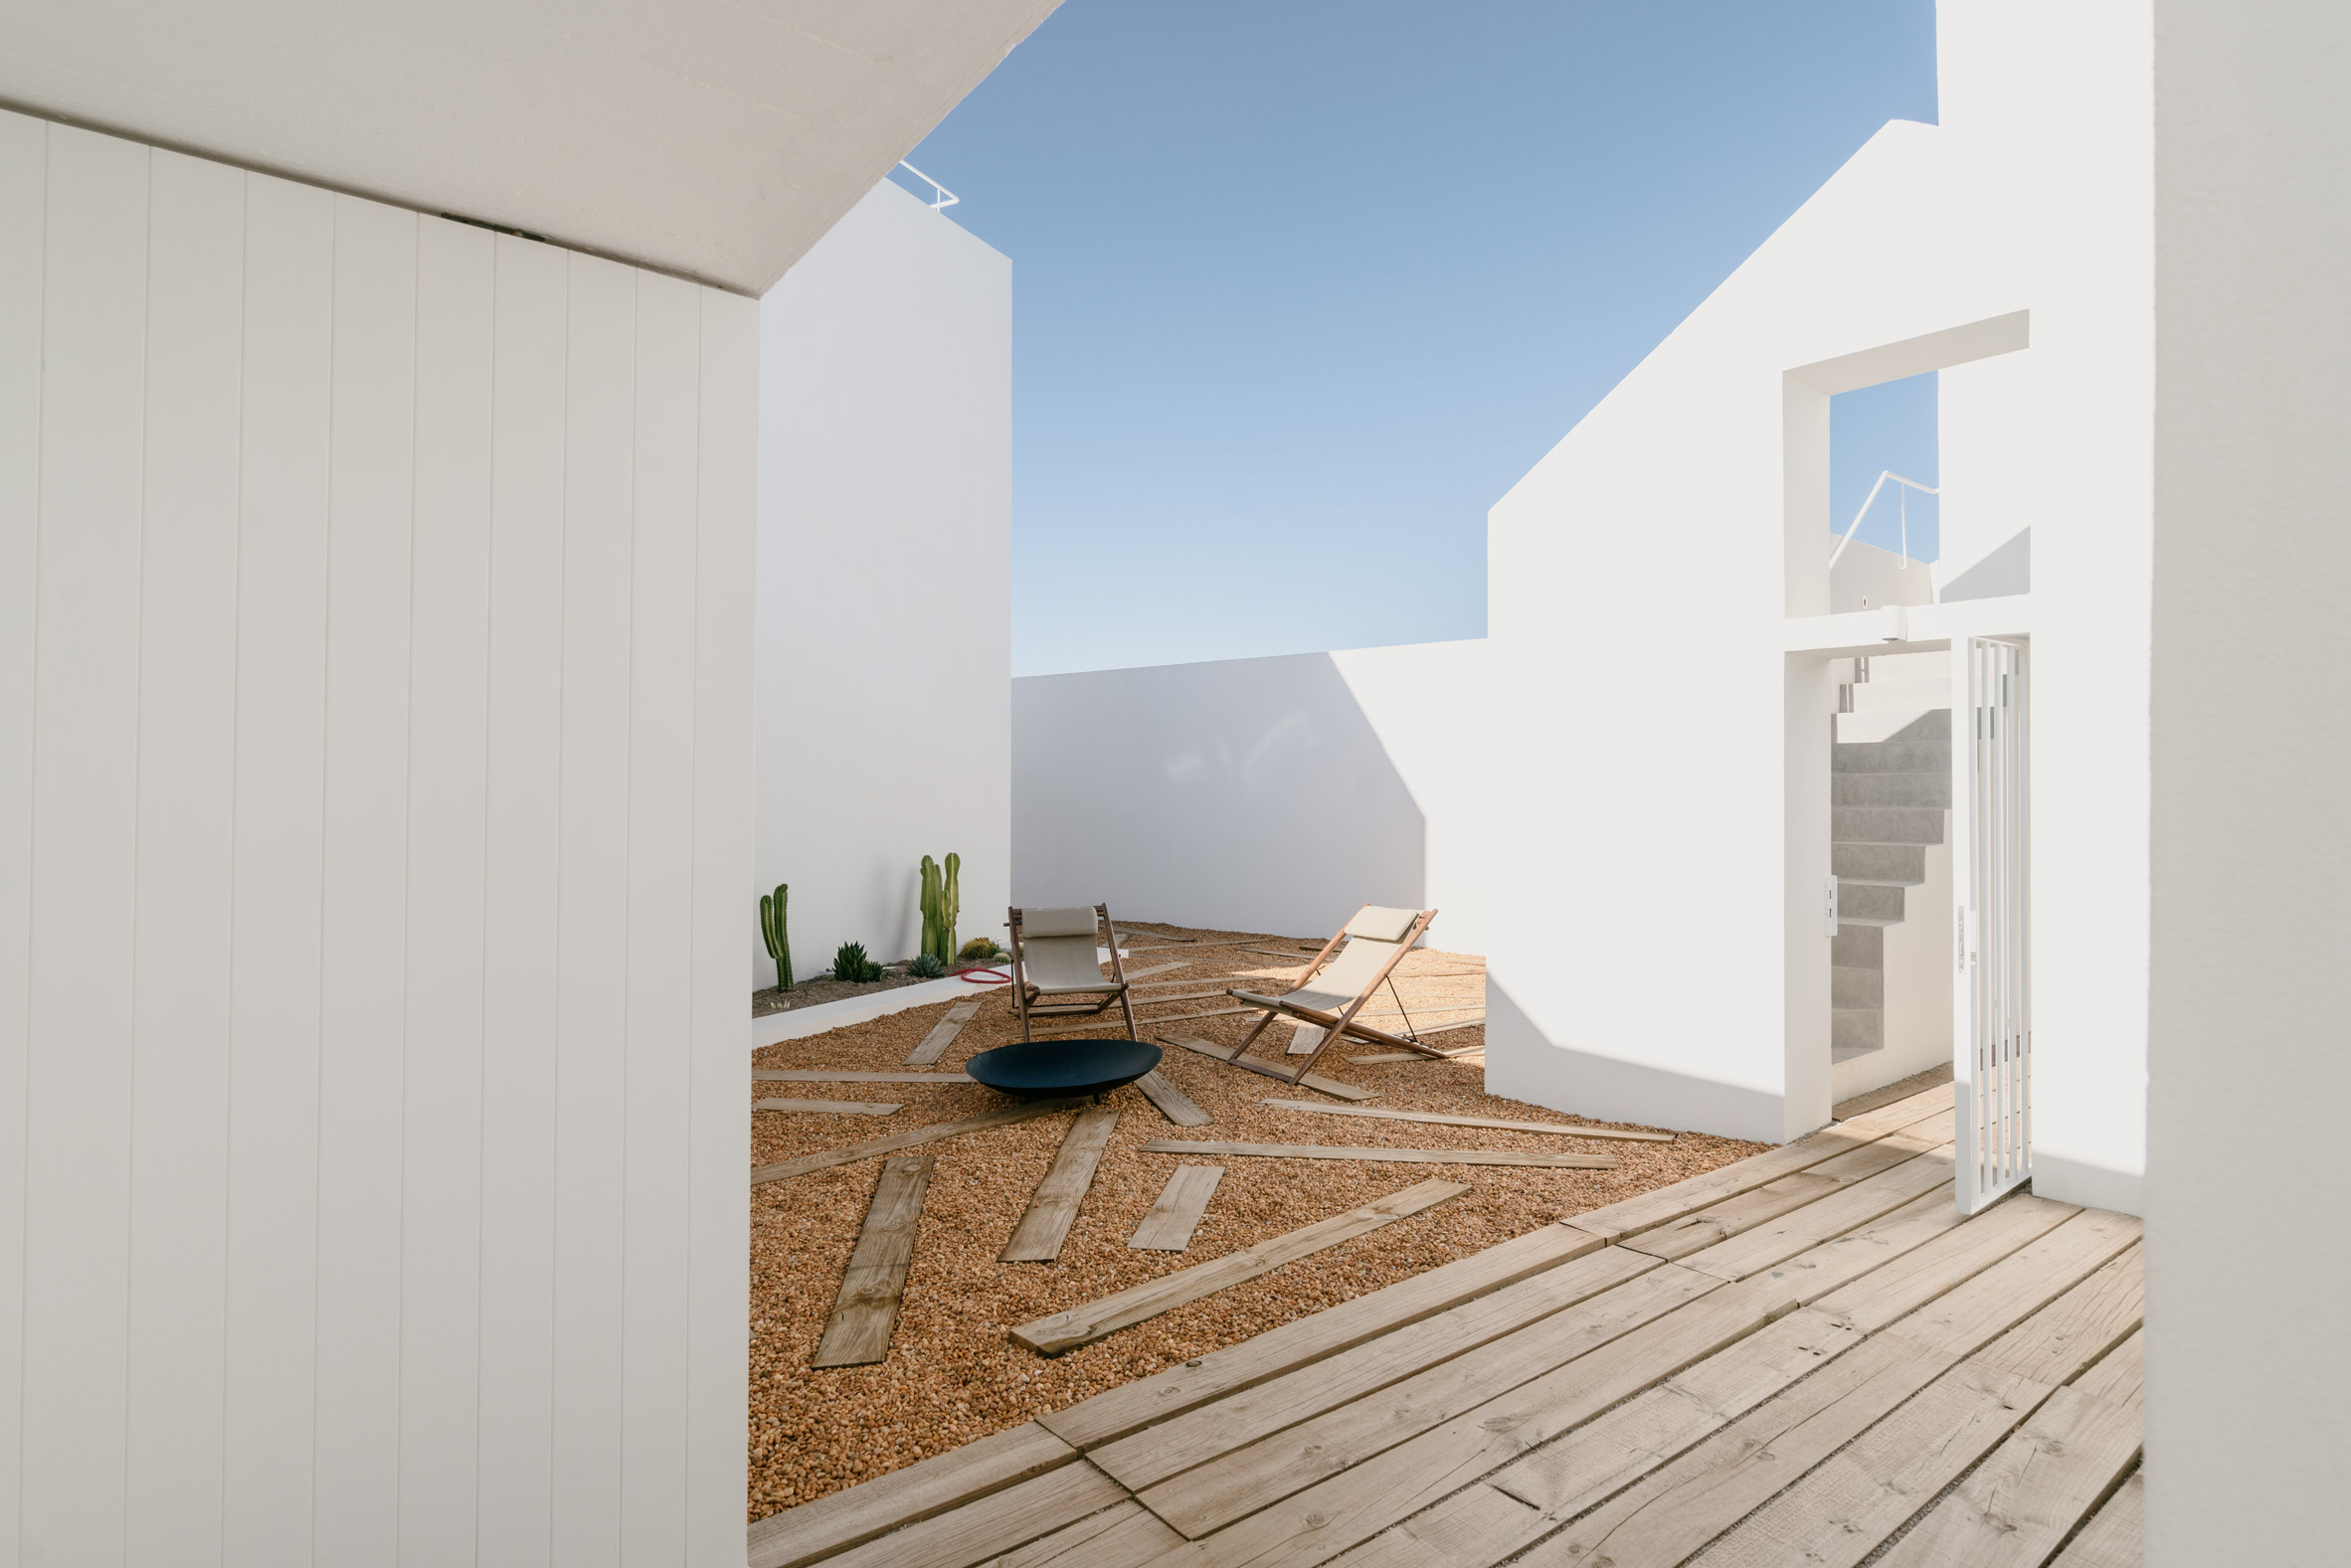 A pebble courtyard separates the living areas 